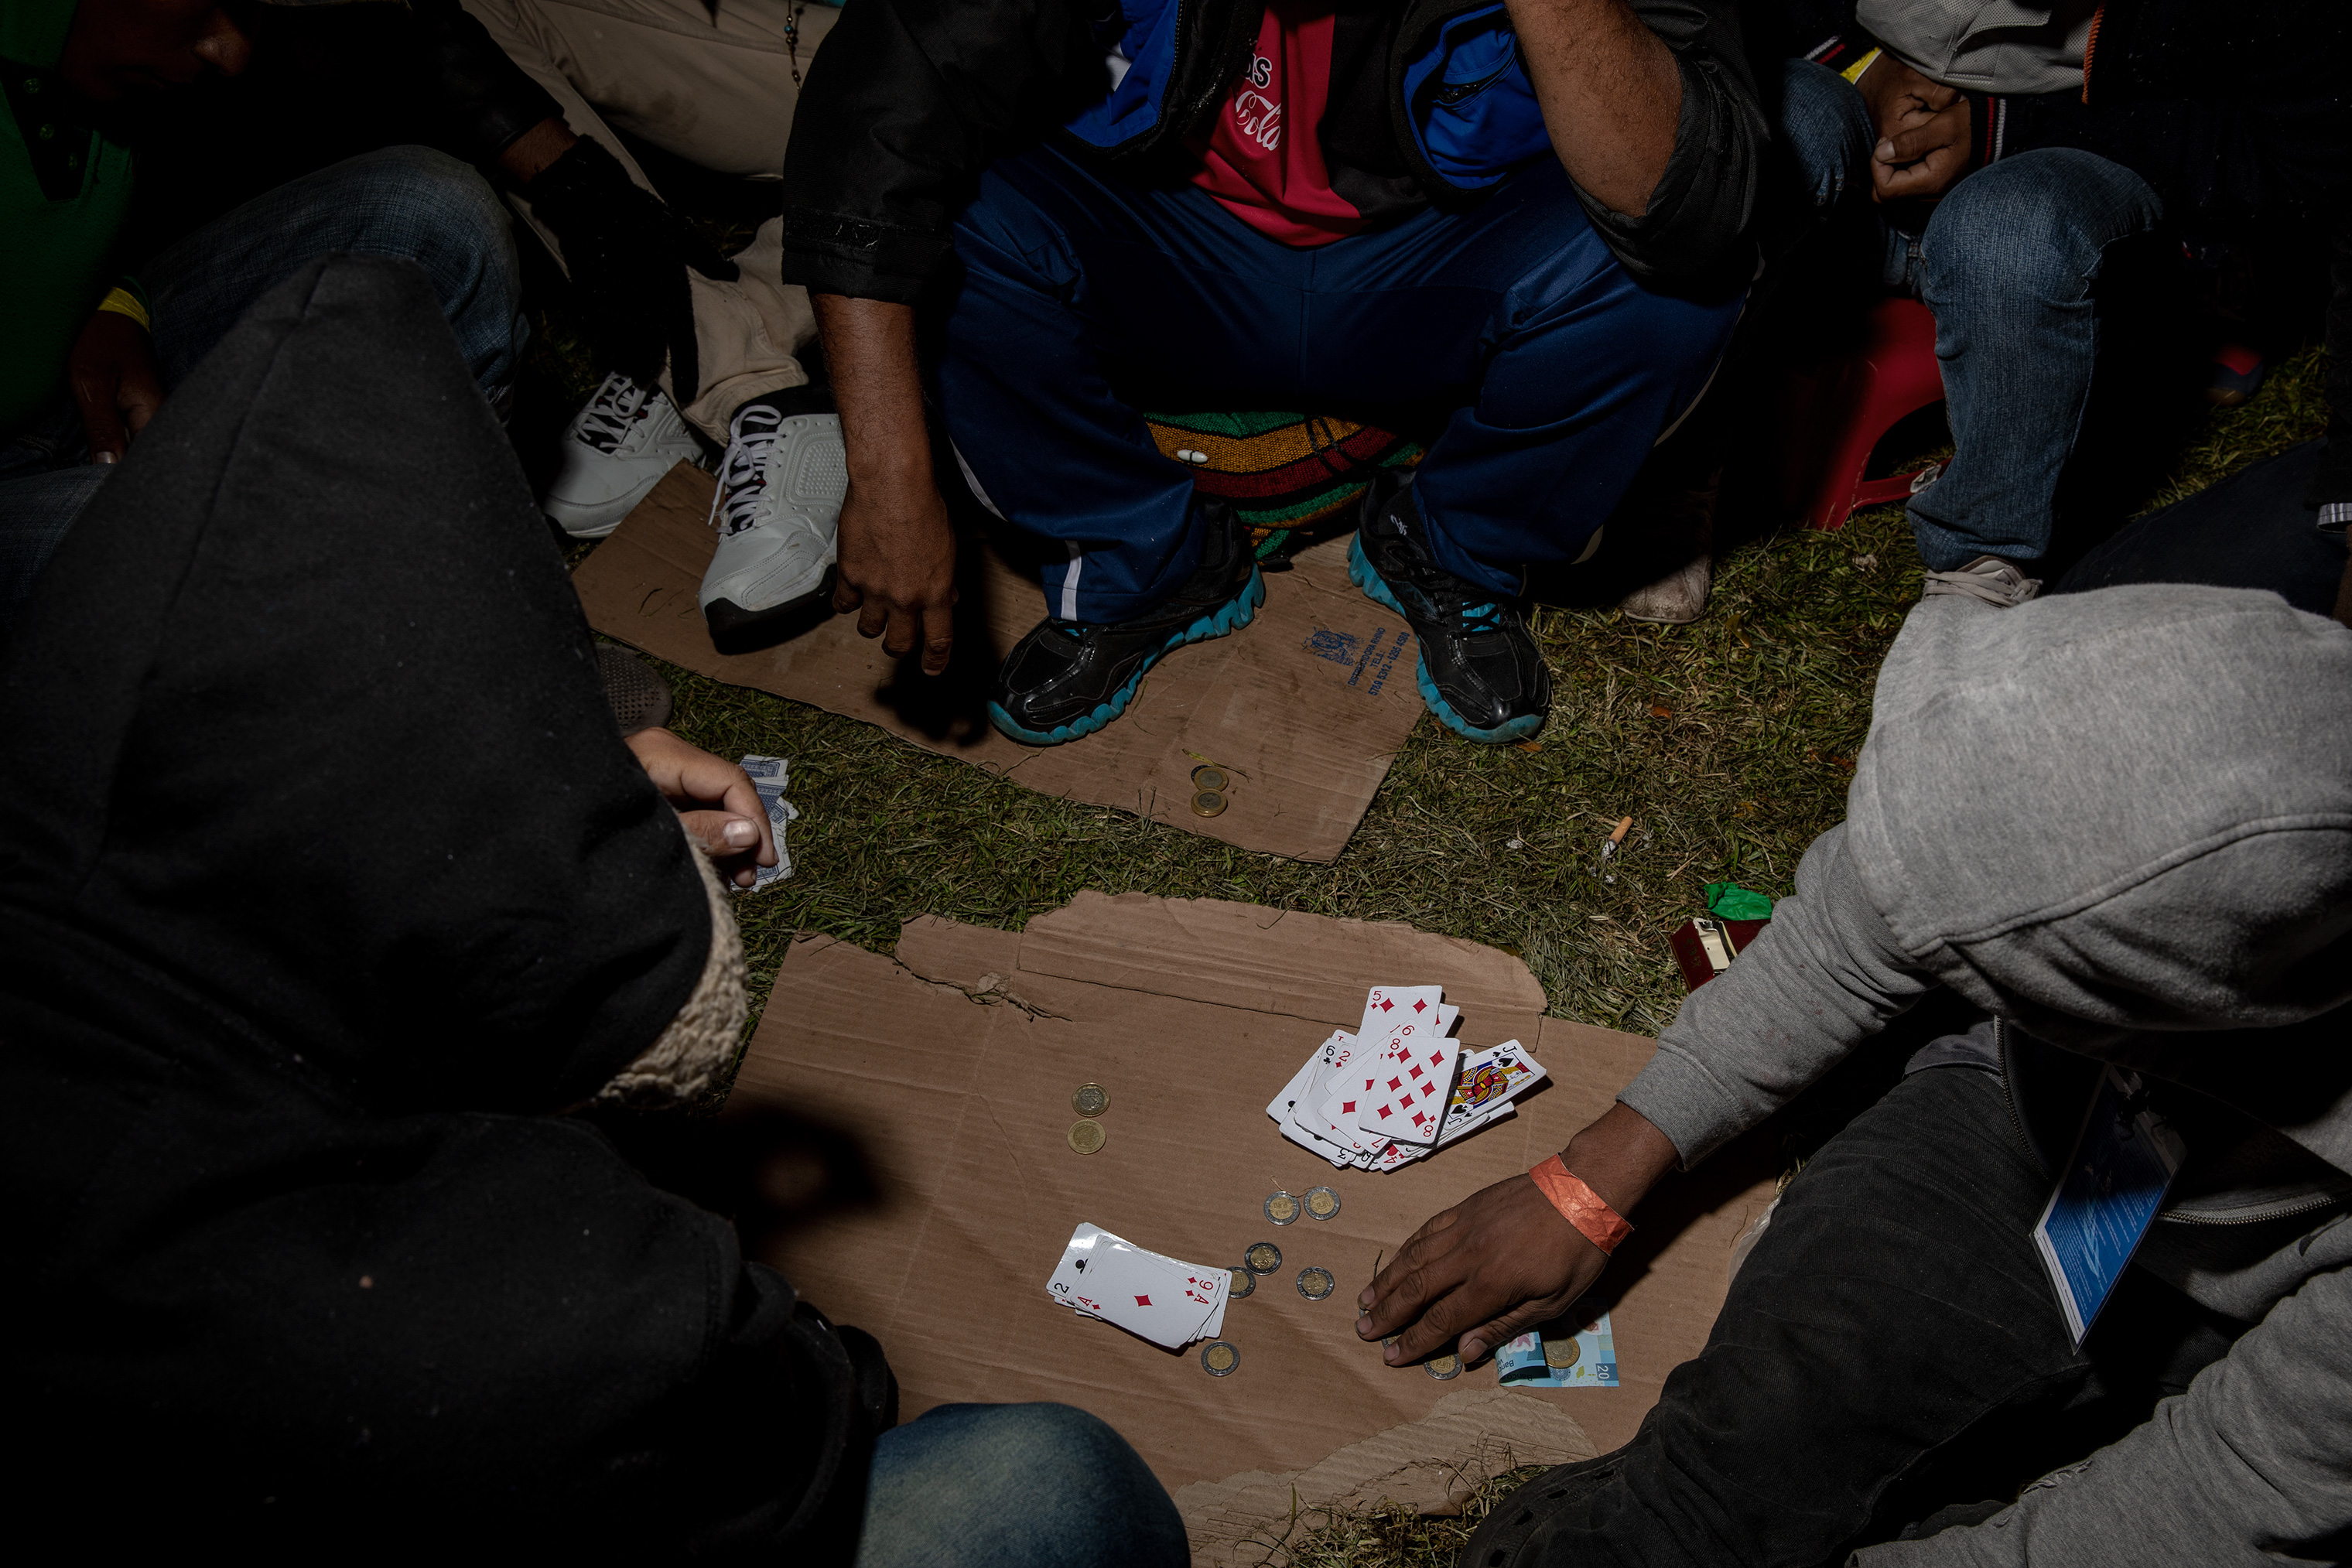 To pass the time at the stadium, migrants play cards, Nov. 9, 2018. (Jerome Sessini—Magnum Photos for TIME)